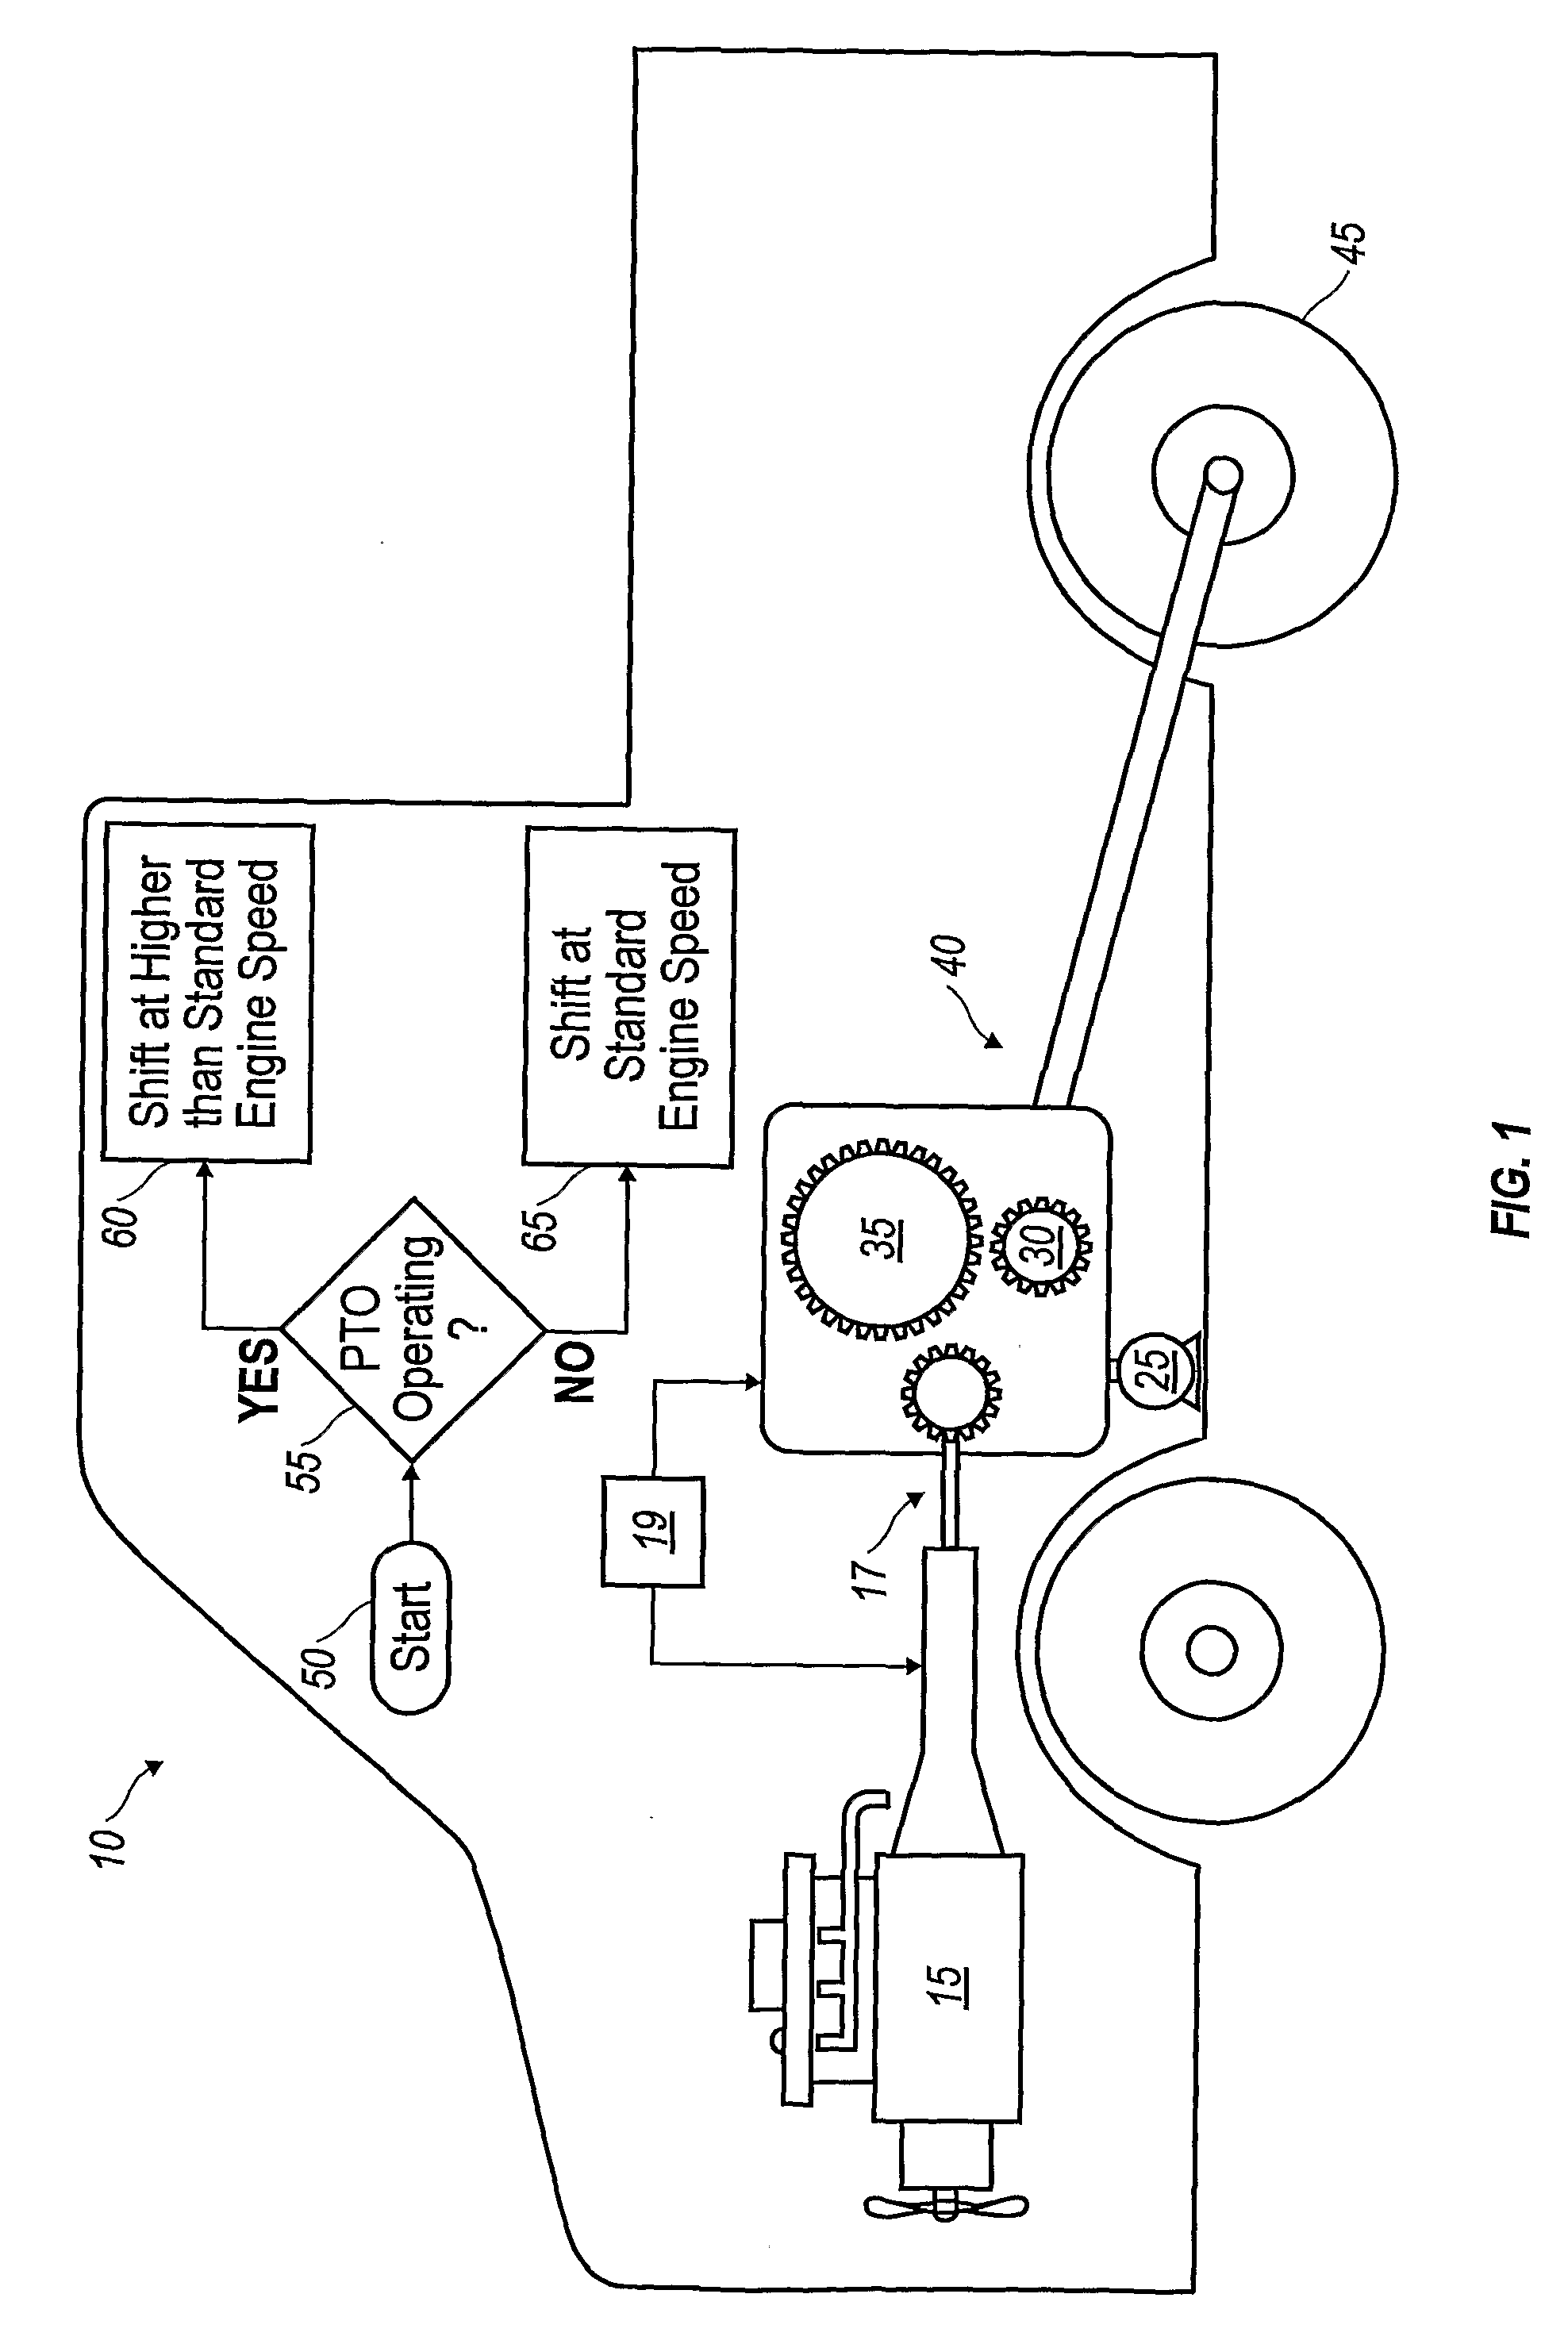 Method and Arrangement For Adapting Shifting Strategies in a Heavy Vehicle Including an Automated Transmission and Experiencing a Pto Load